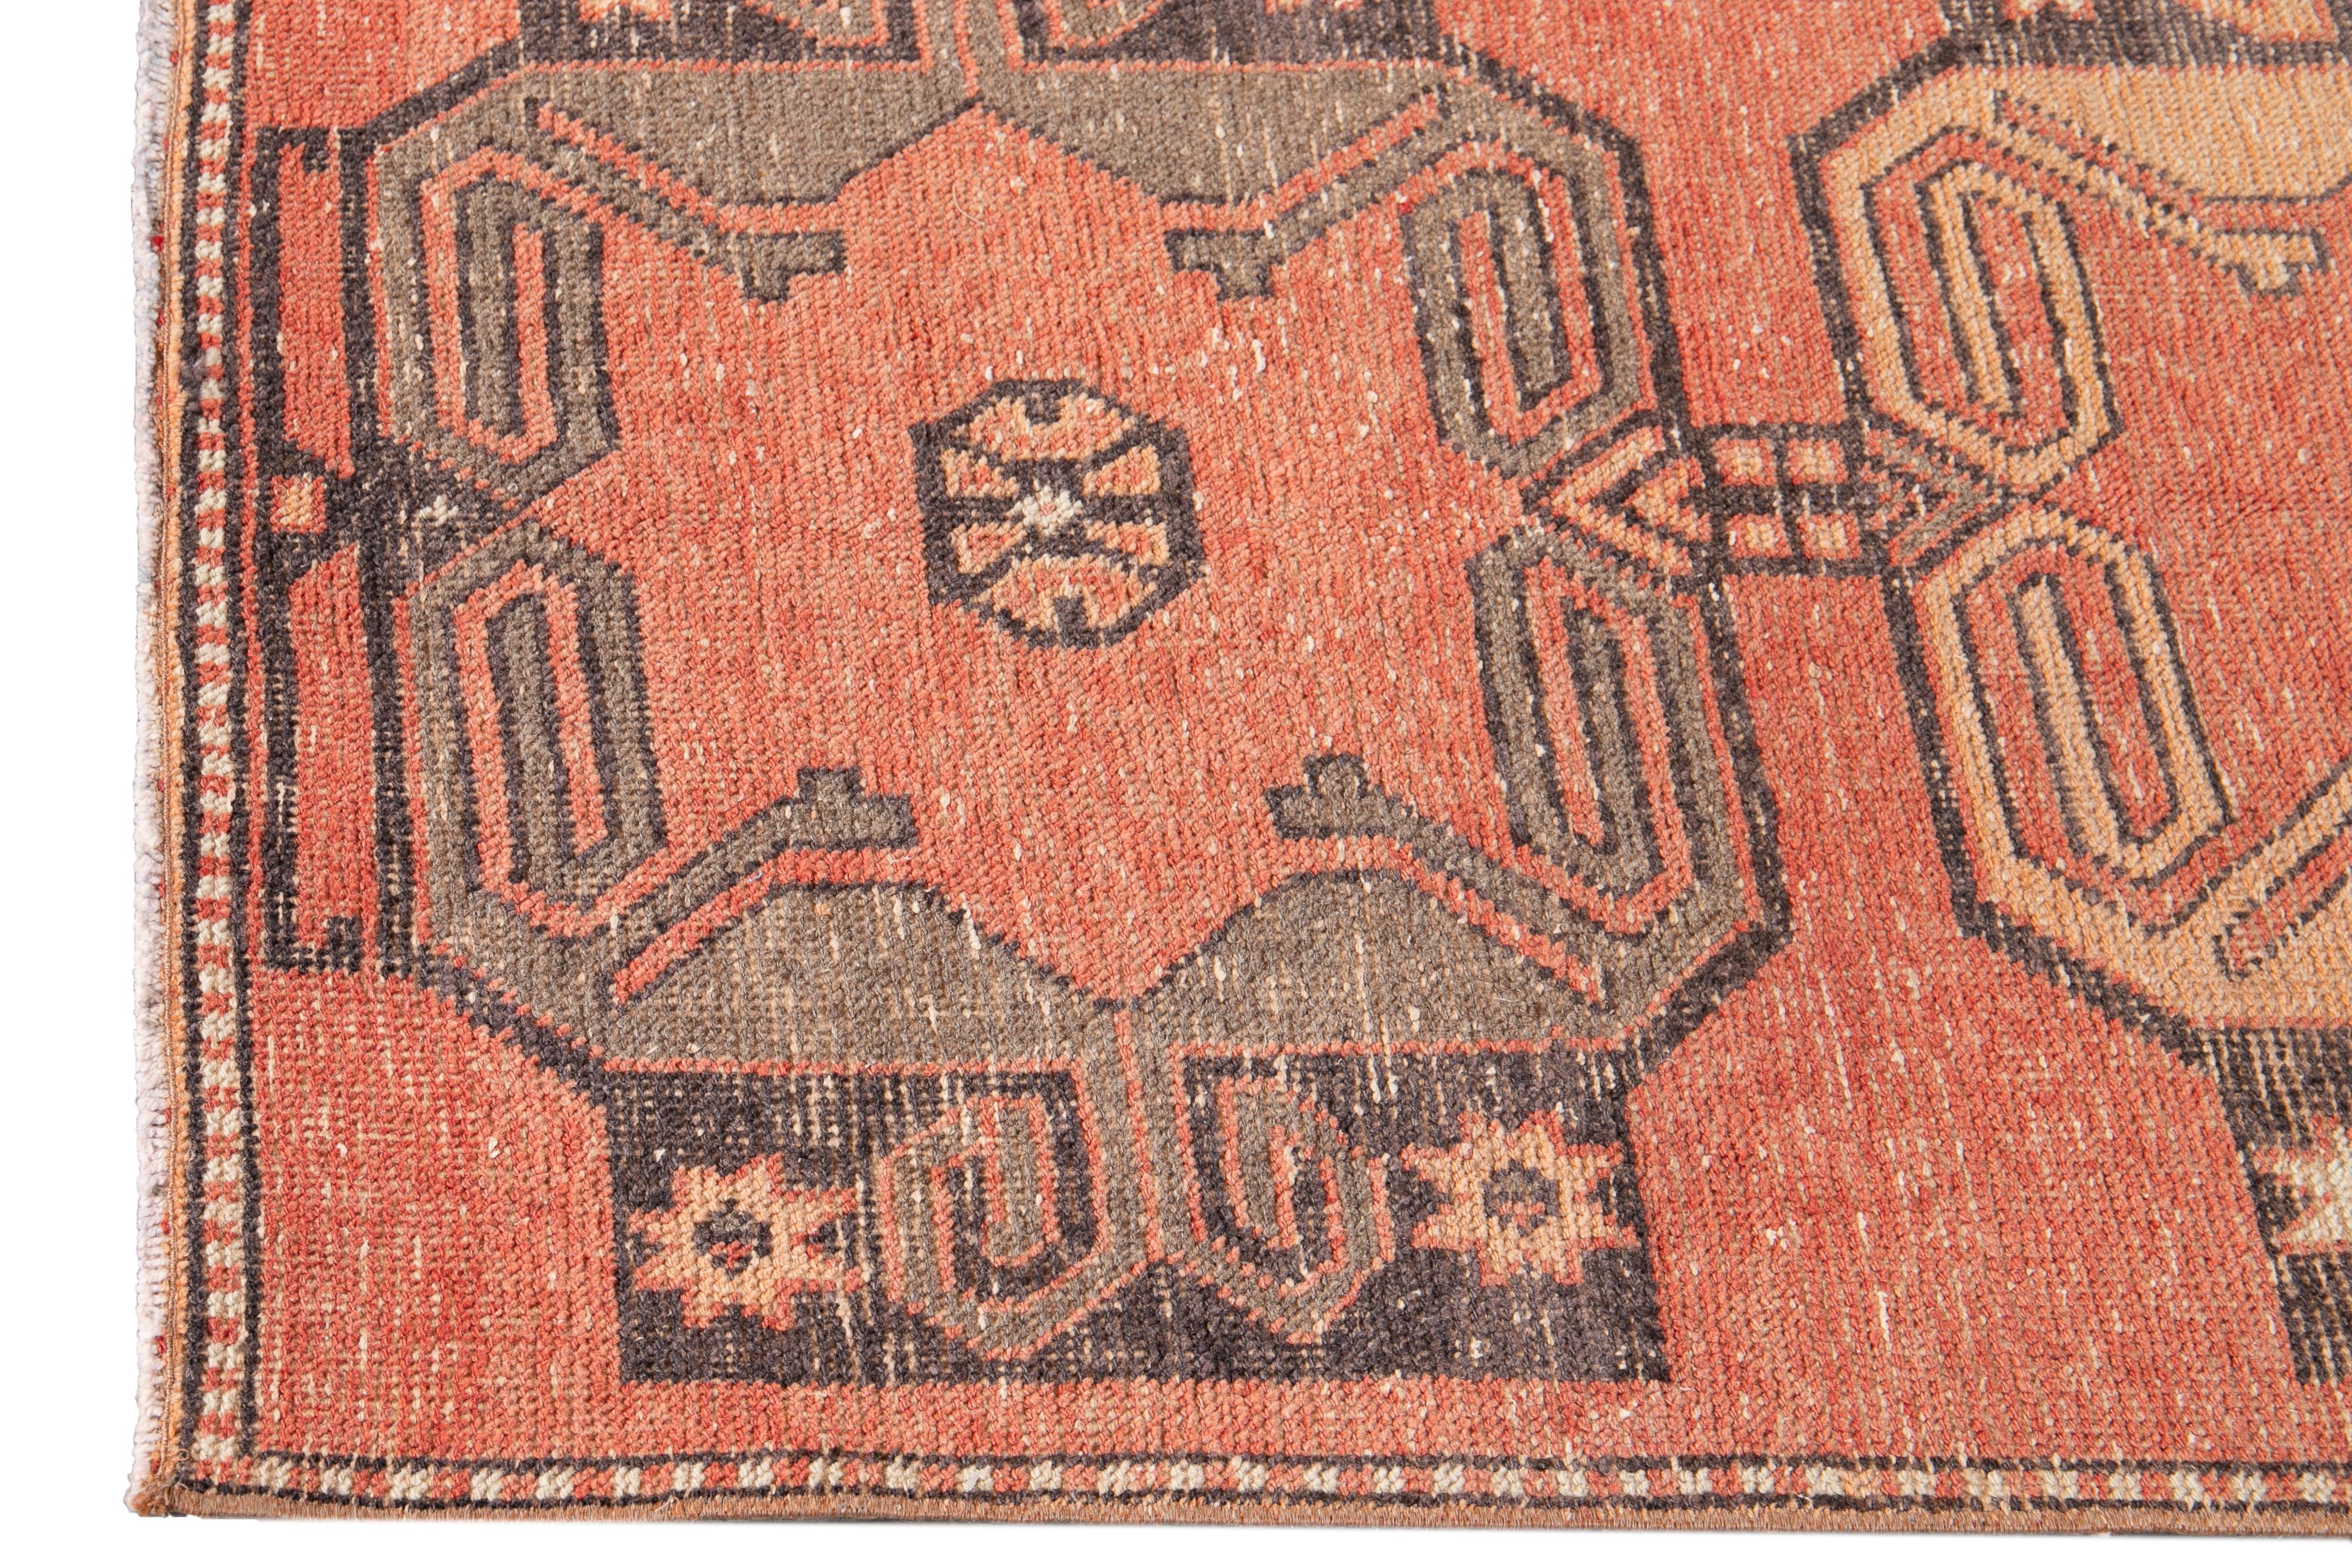 Beautiful antique Turkish runner rug, handmade wool with a light rust field, gray and ivory accents in a multi medallion geometric design.

This rug measures 3' 0